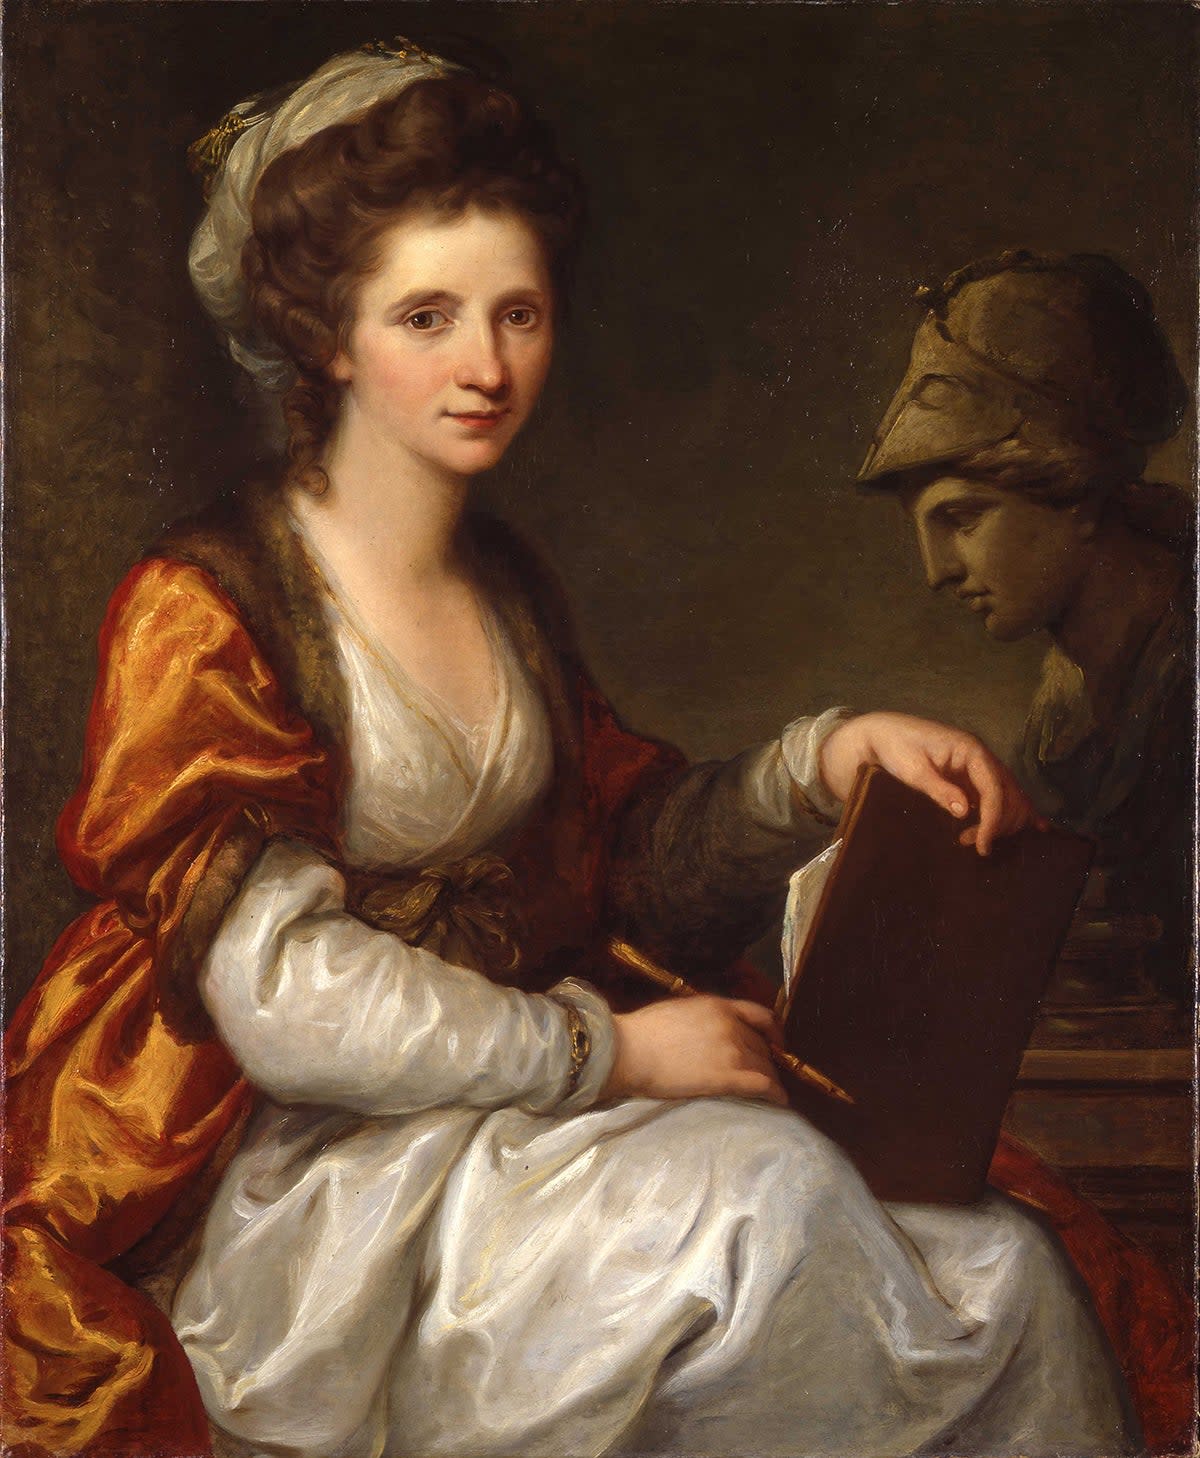 Angelica Kauffman, self-portrait with bust of Minerva, c. 1780-81 (Gottfried Keller Foundation, Federal Office of Culture, Bern)